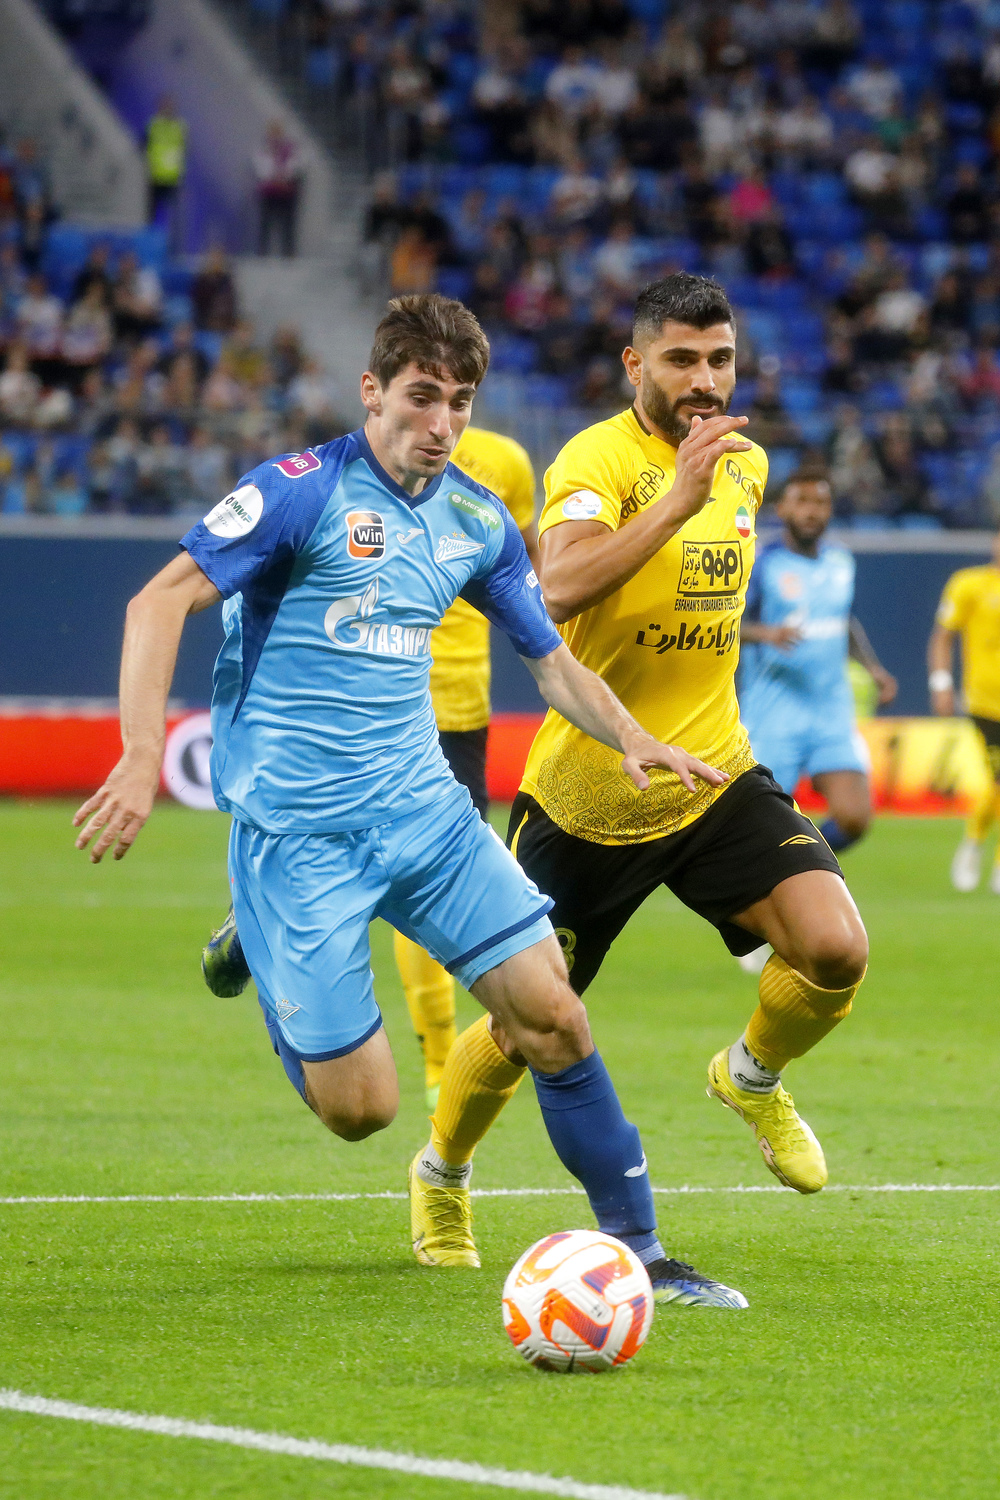 Zenit defeated Sepahan at home: both halves ended with a difference of 3 goals